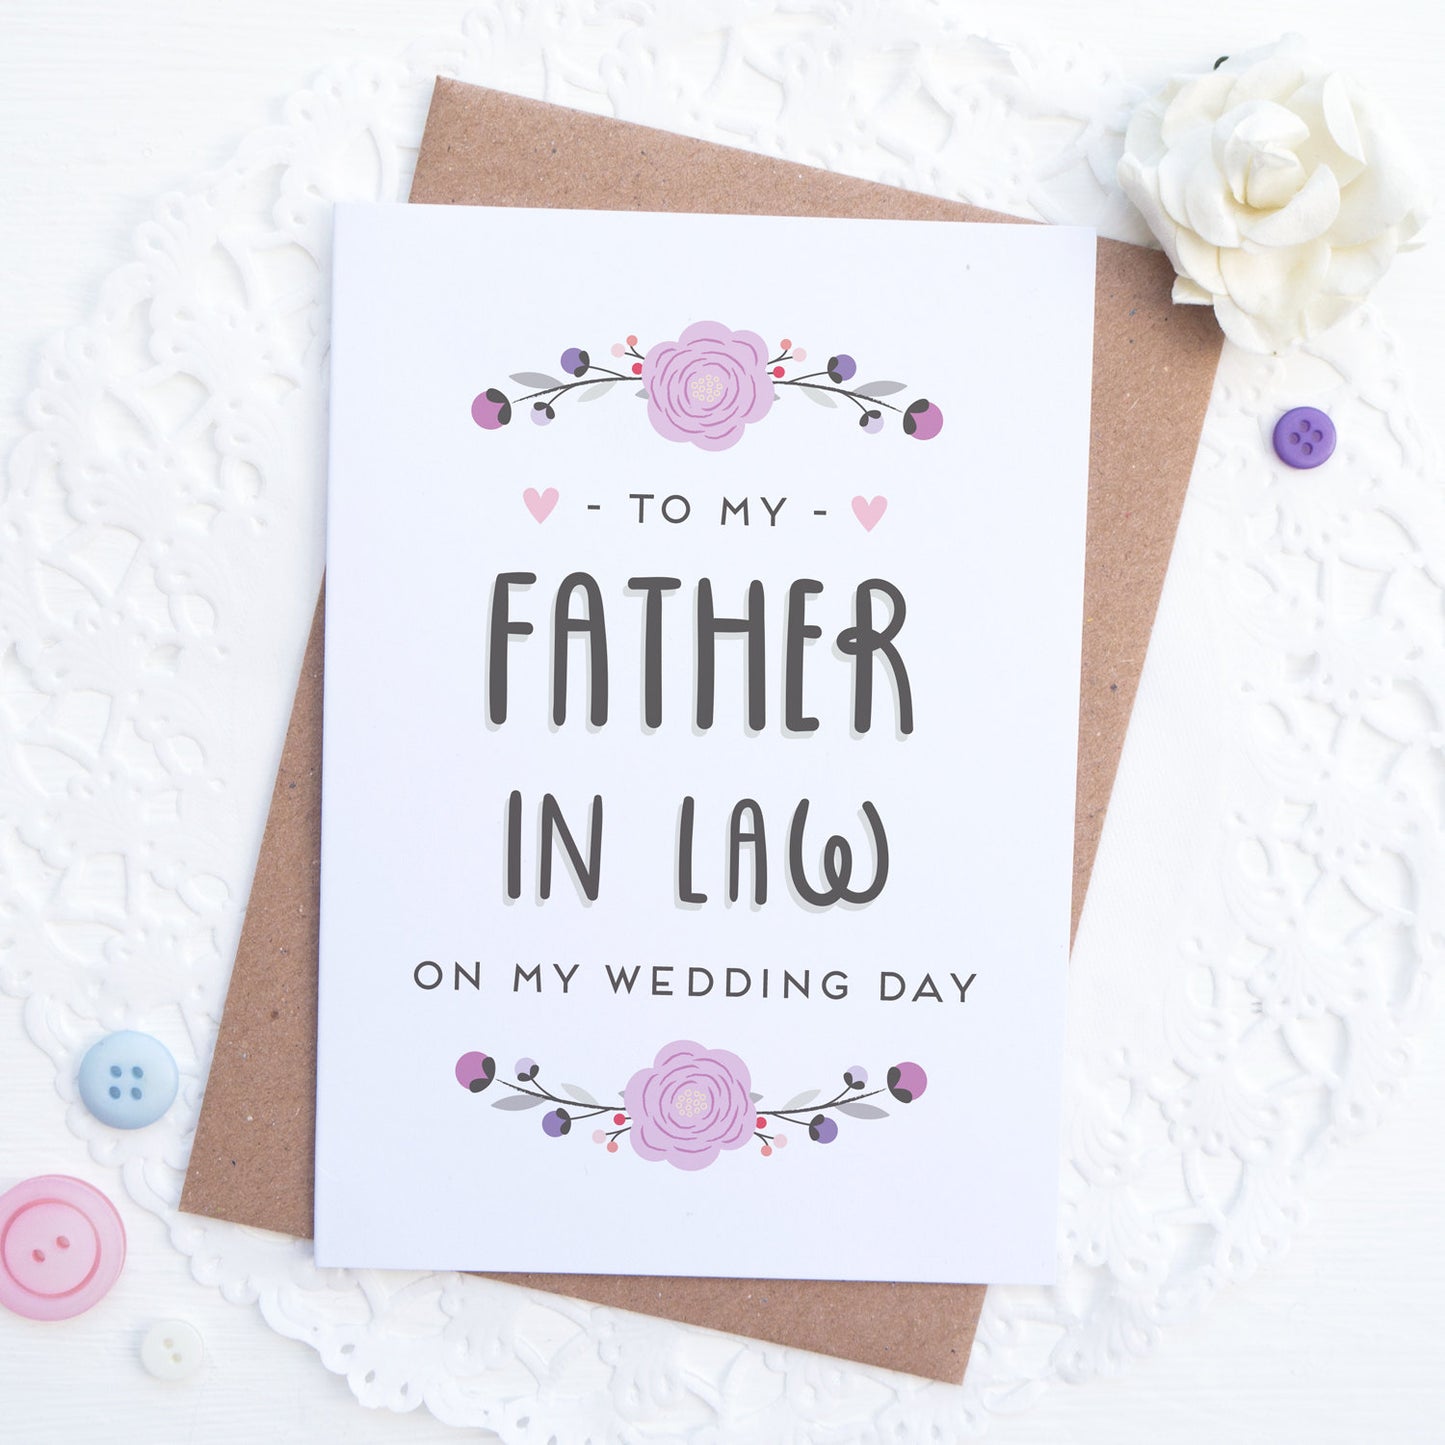 To my father in law on my wedding day card in purple